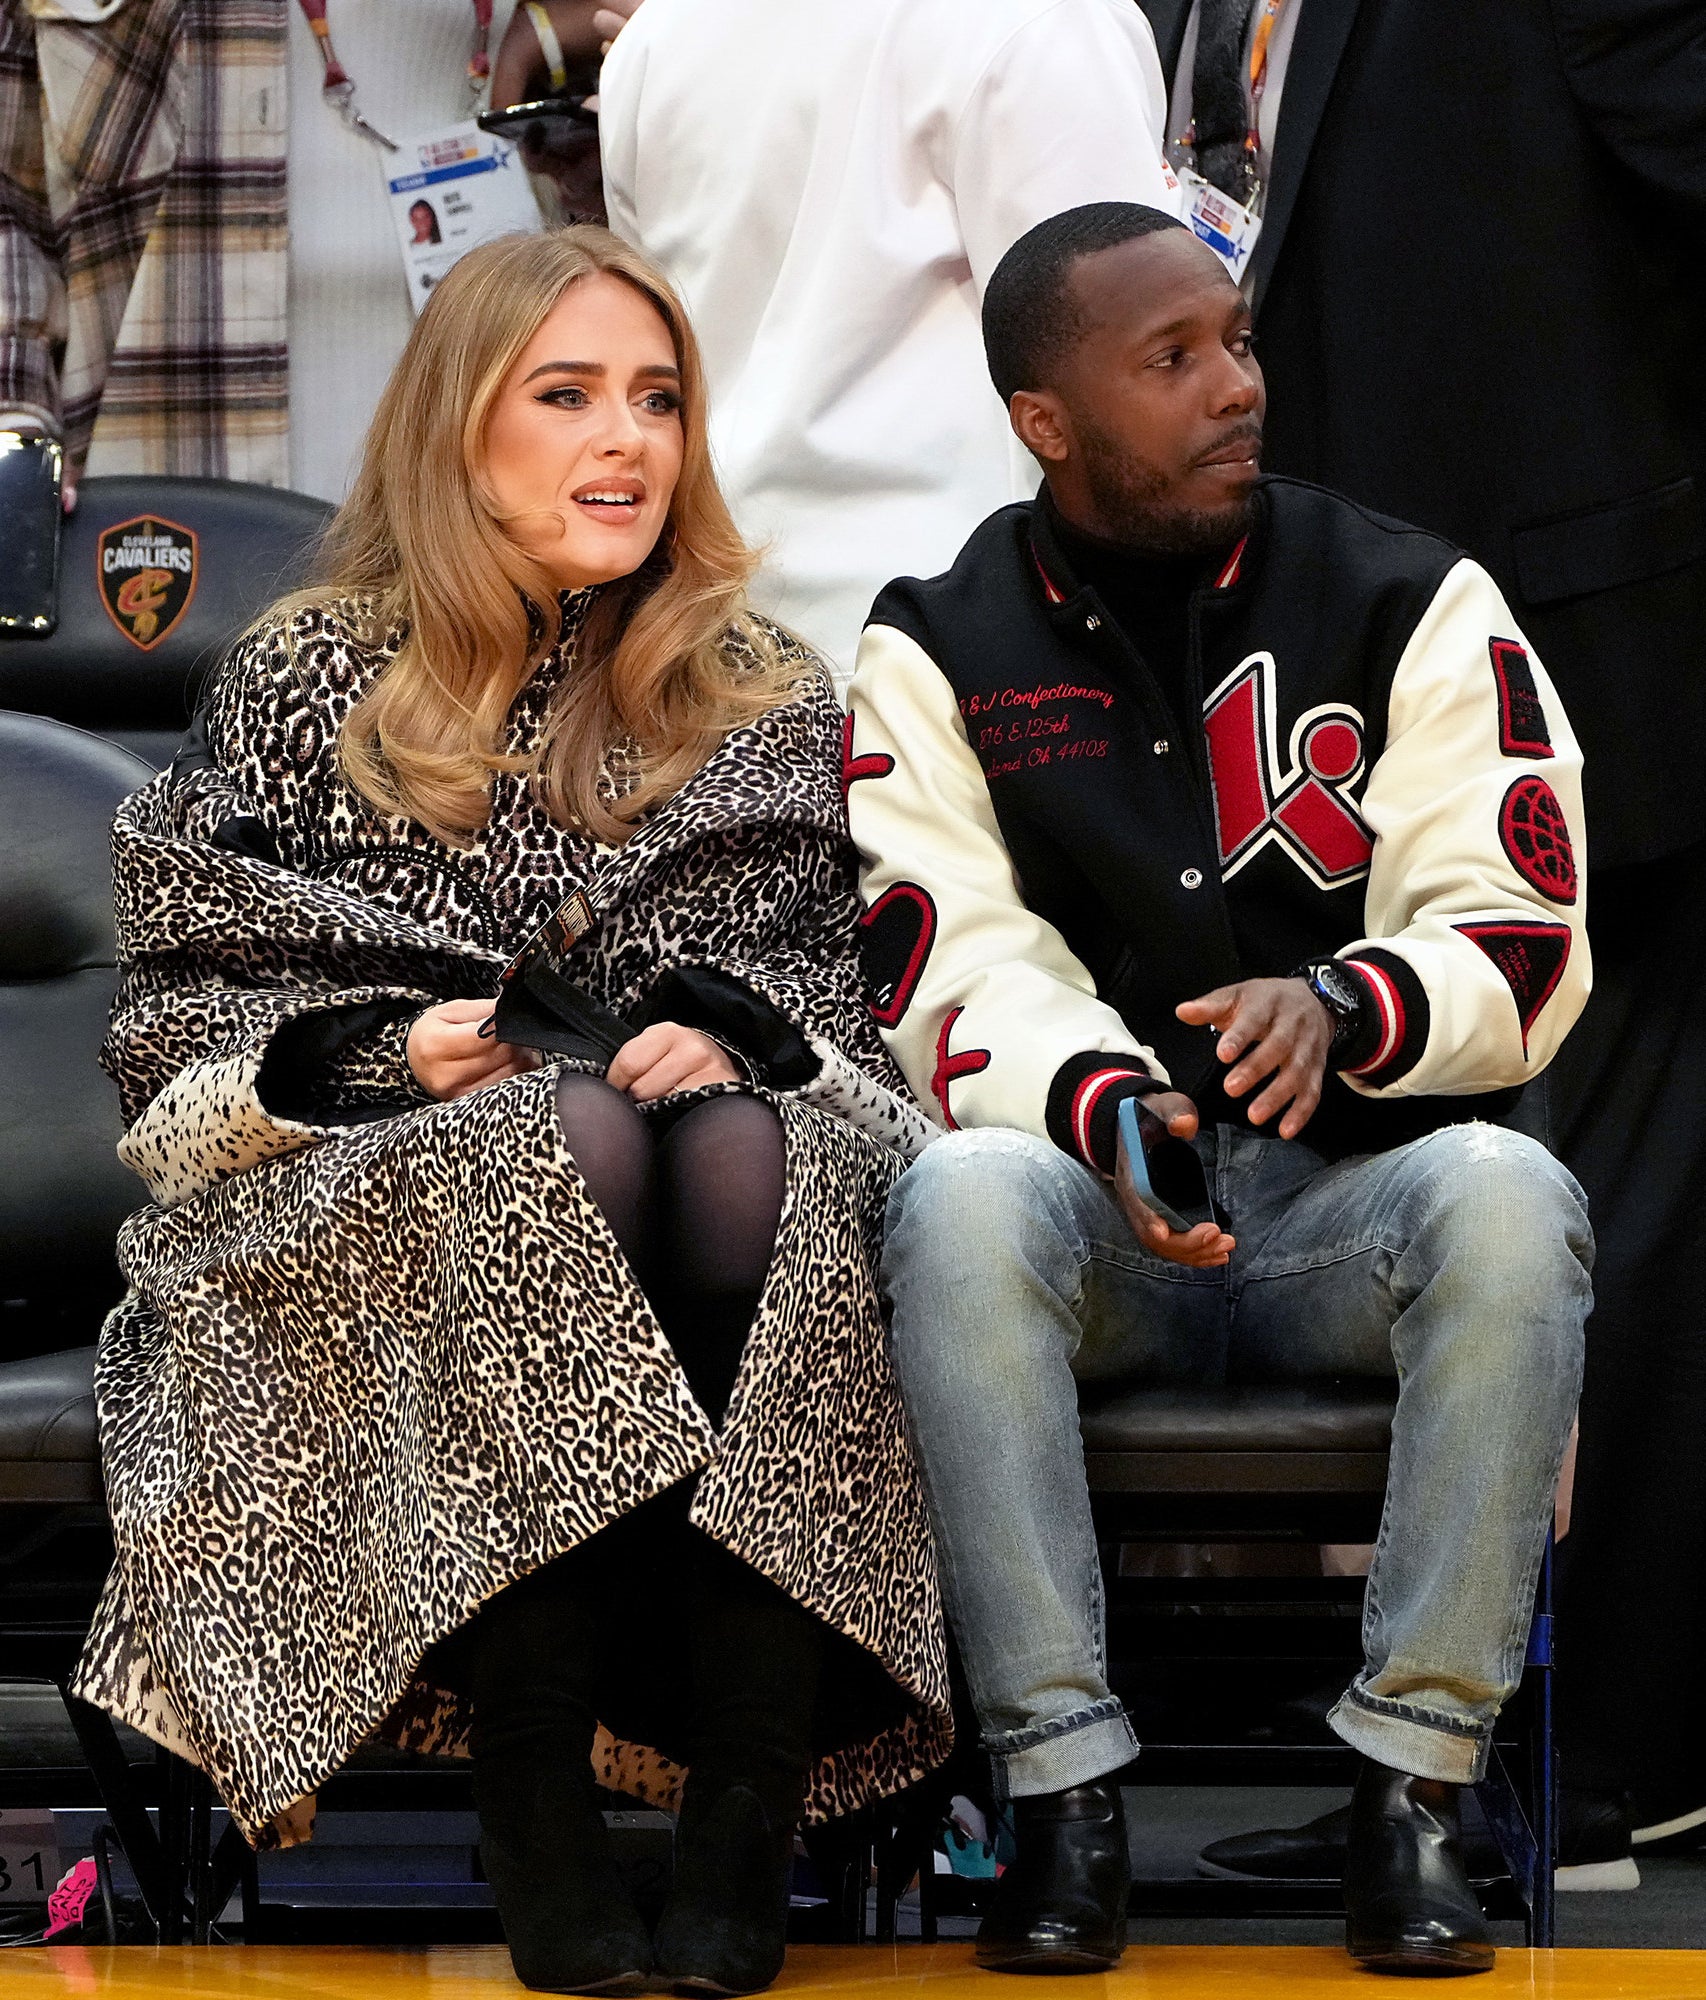 Adele and Rich Paul at a sports game